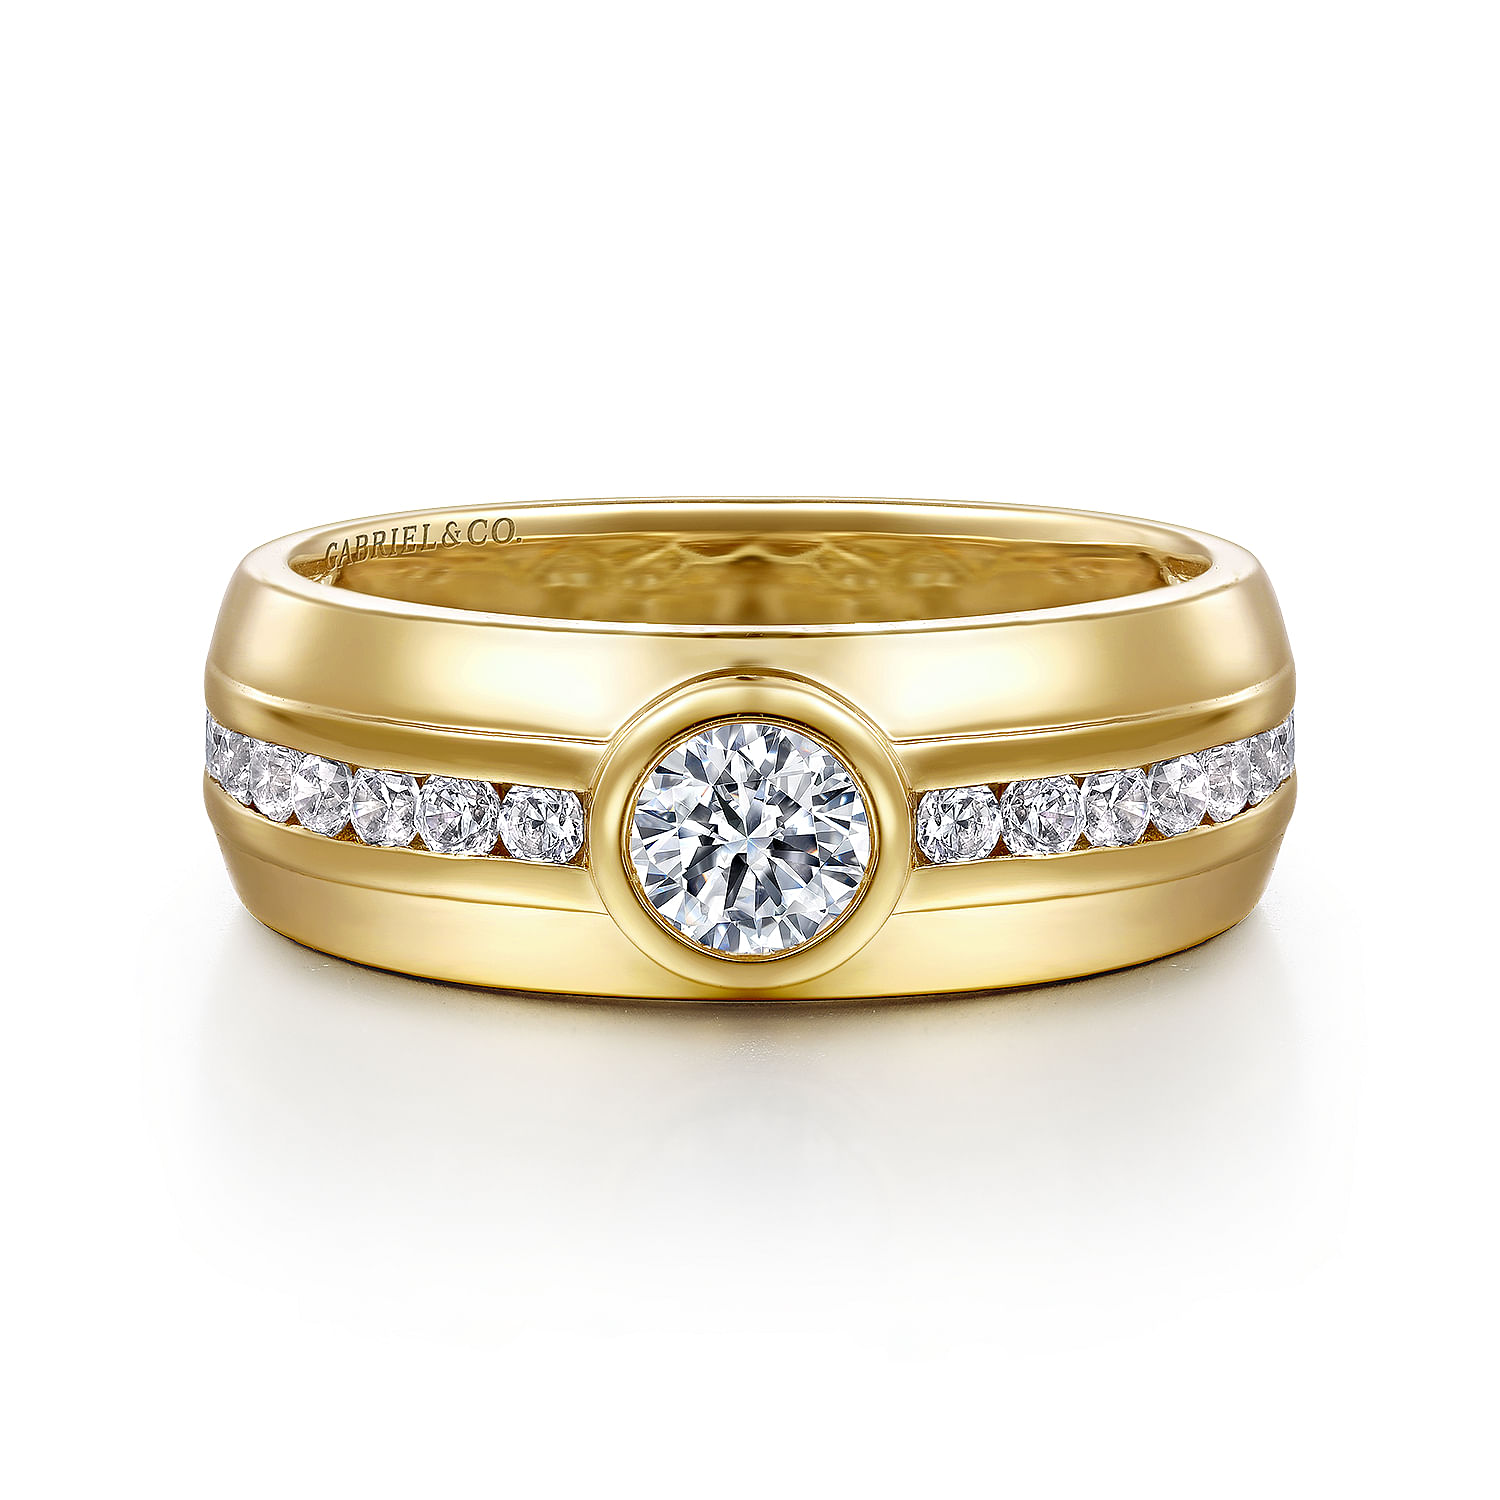 14K Yellow Gold Diamond Mens Engagement Ring in High Polished Finish